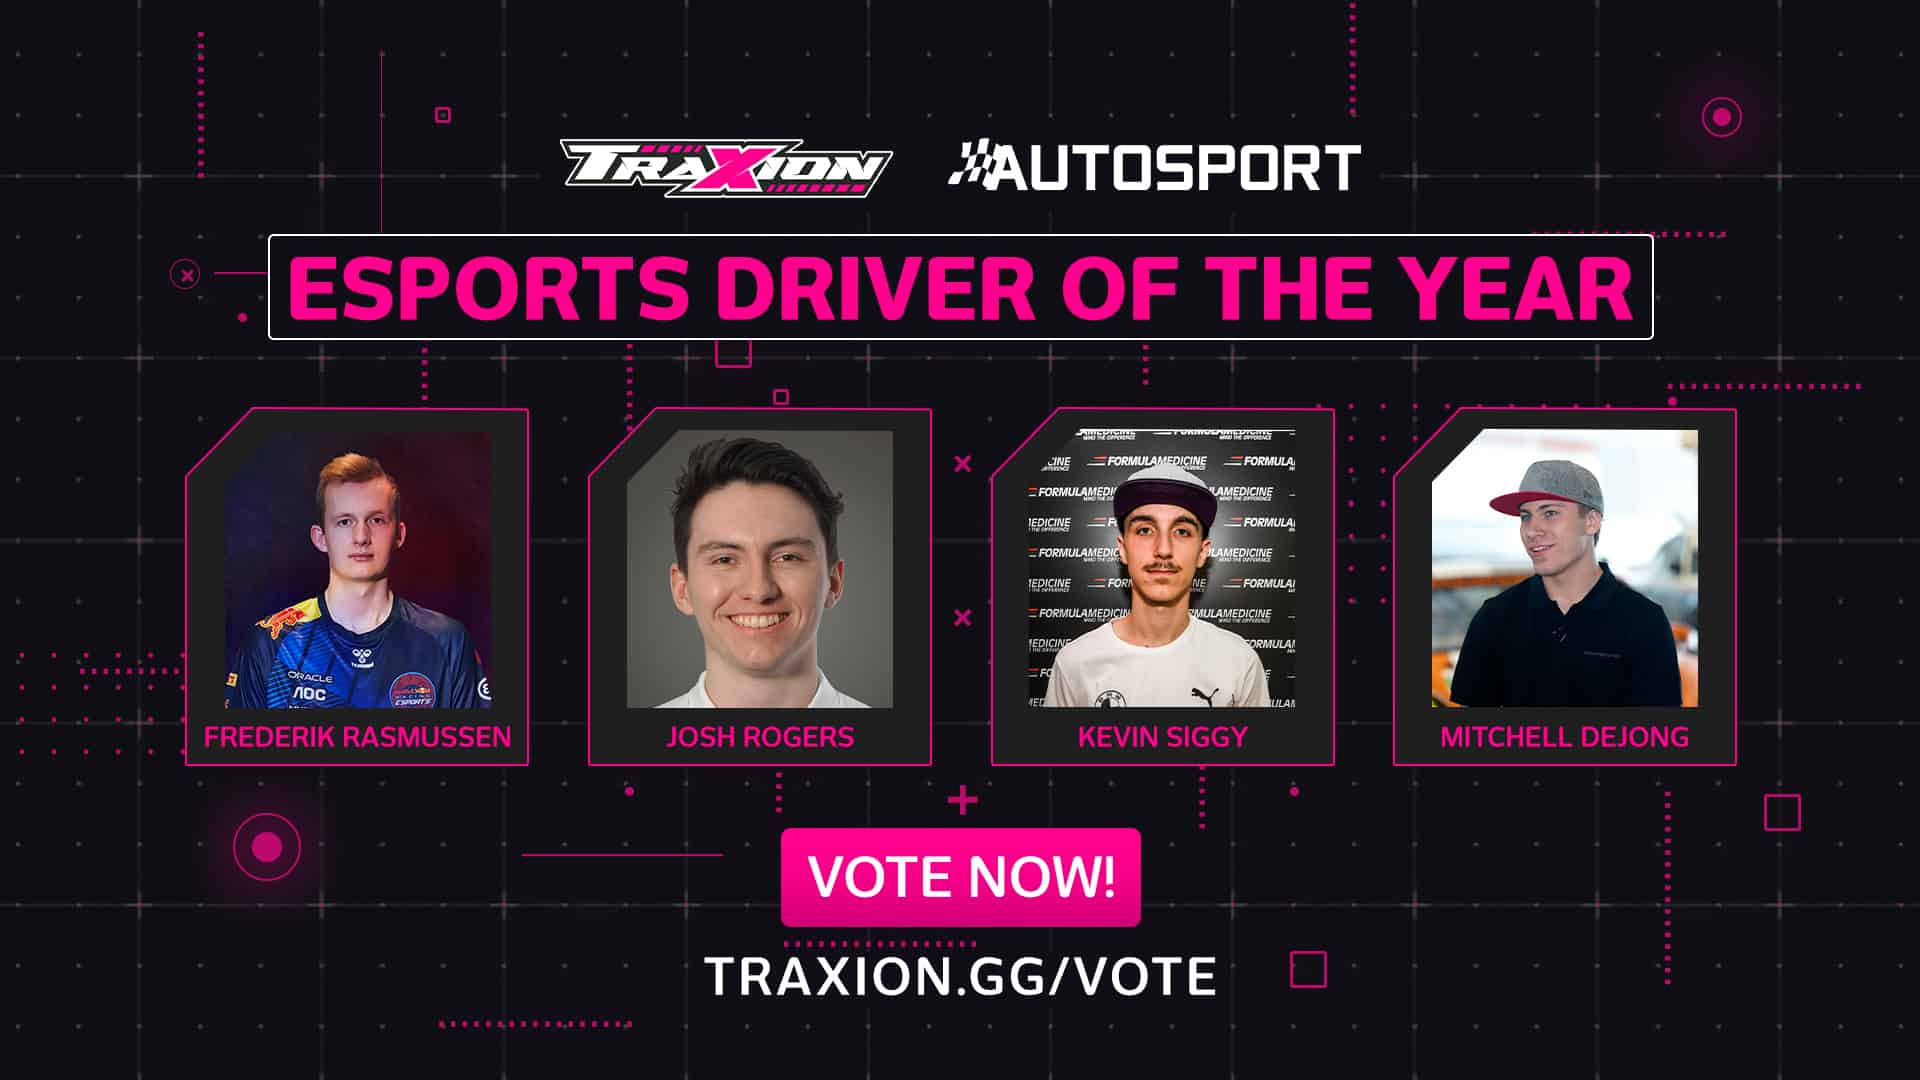 Vote now for the Autosport Esports Driver of the Year